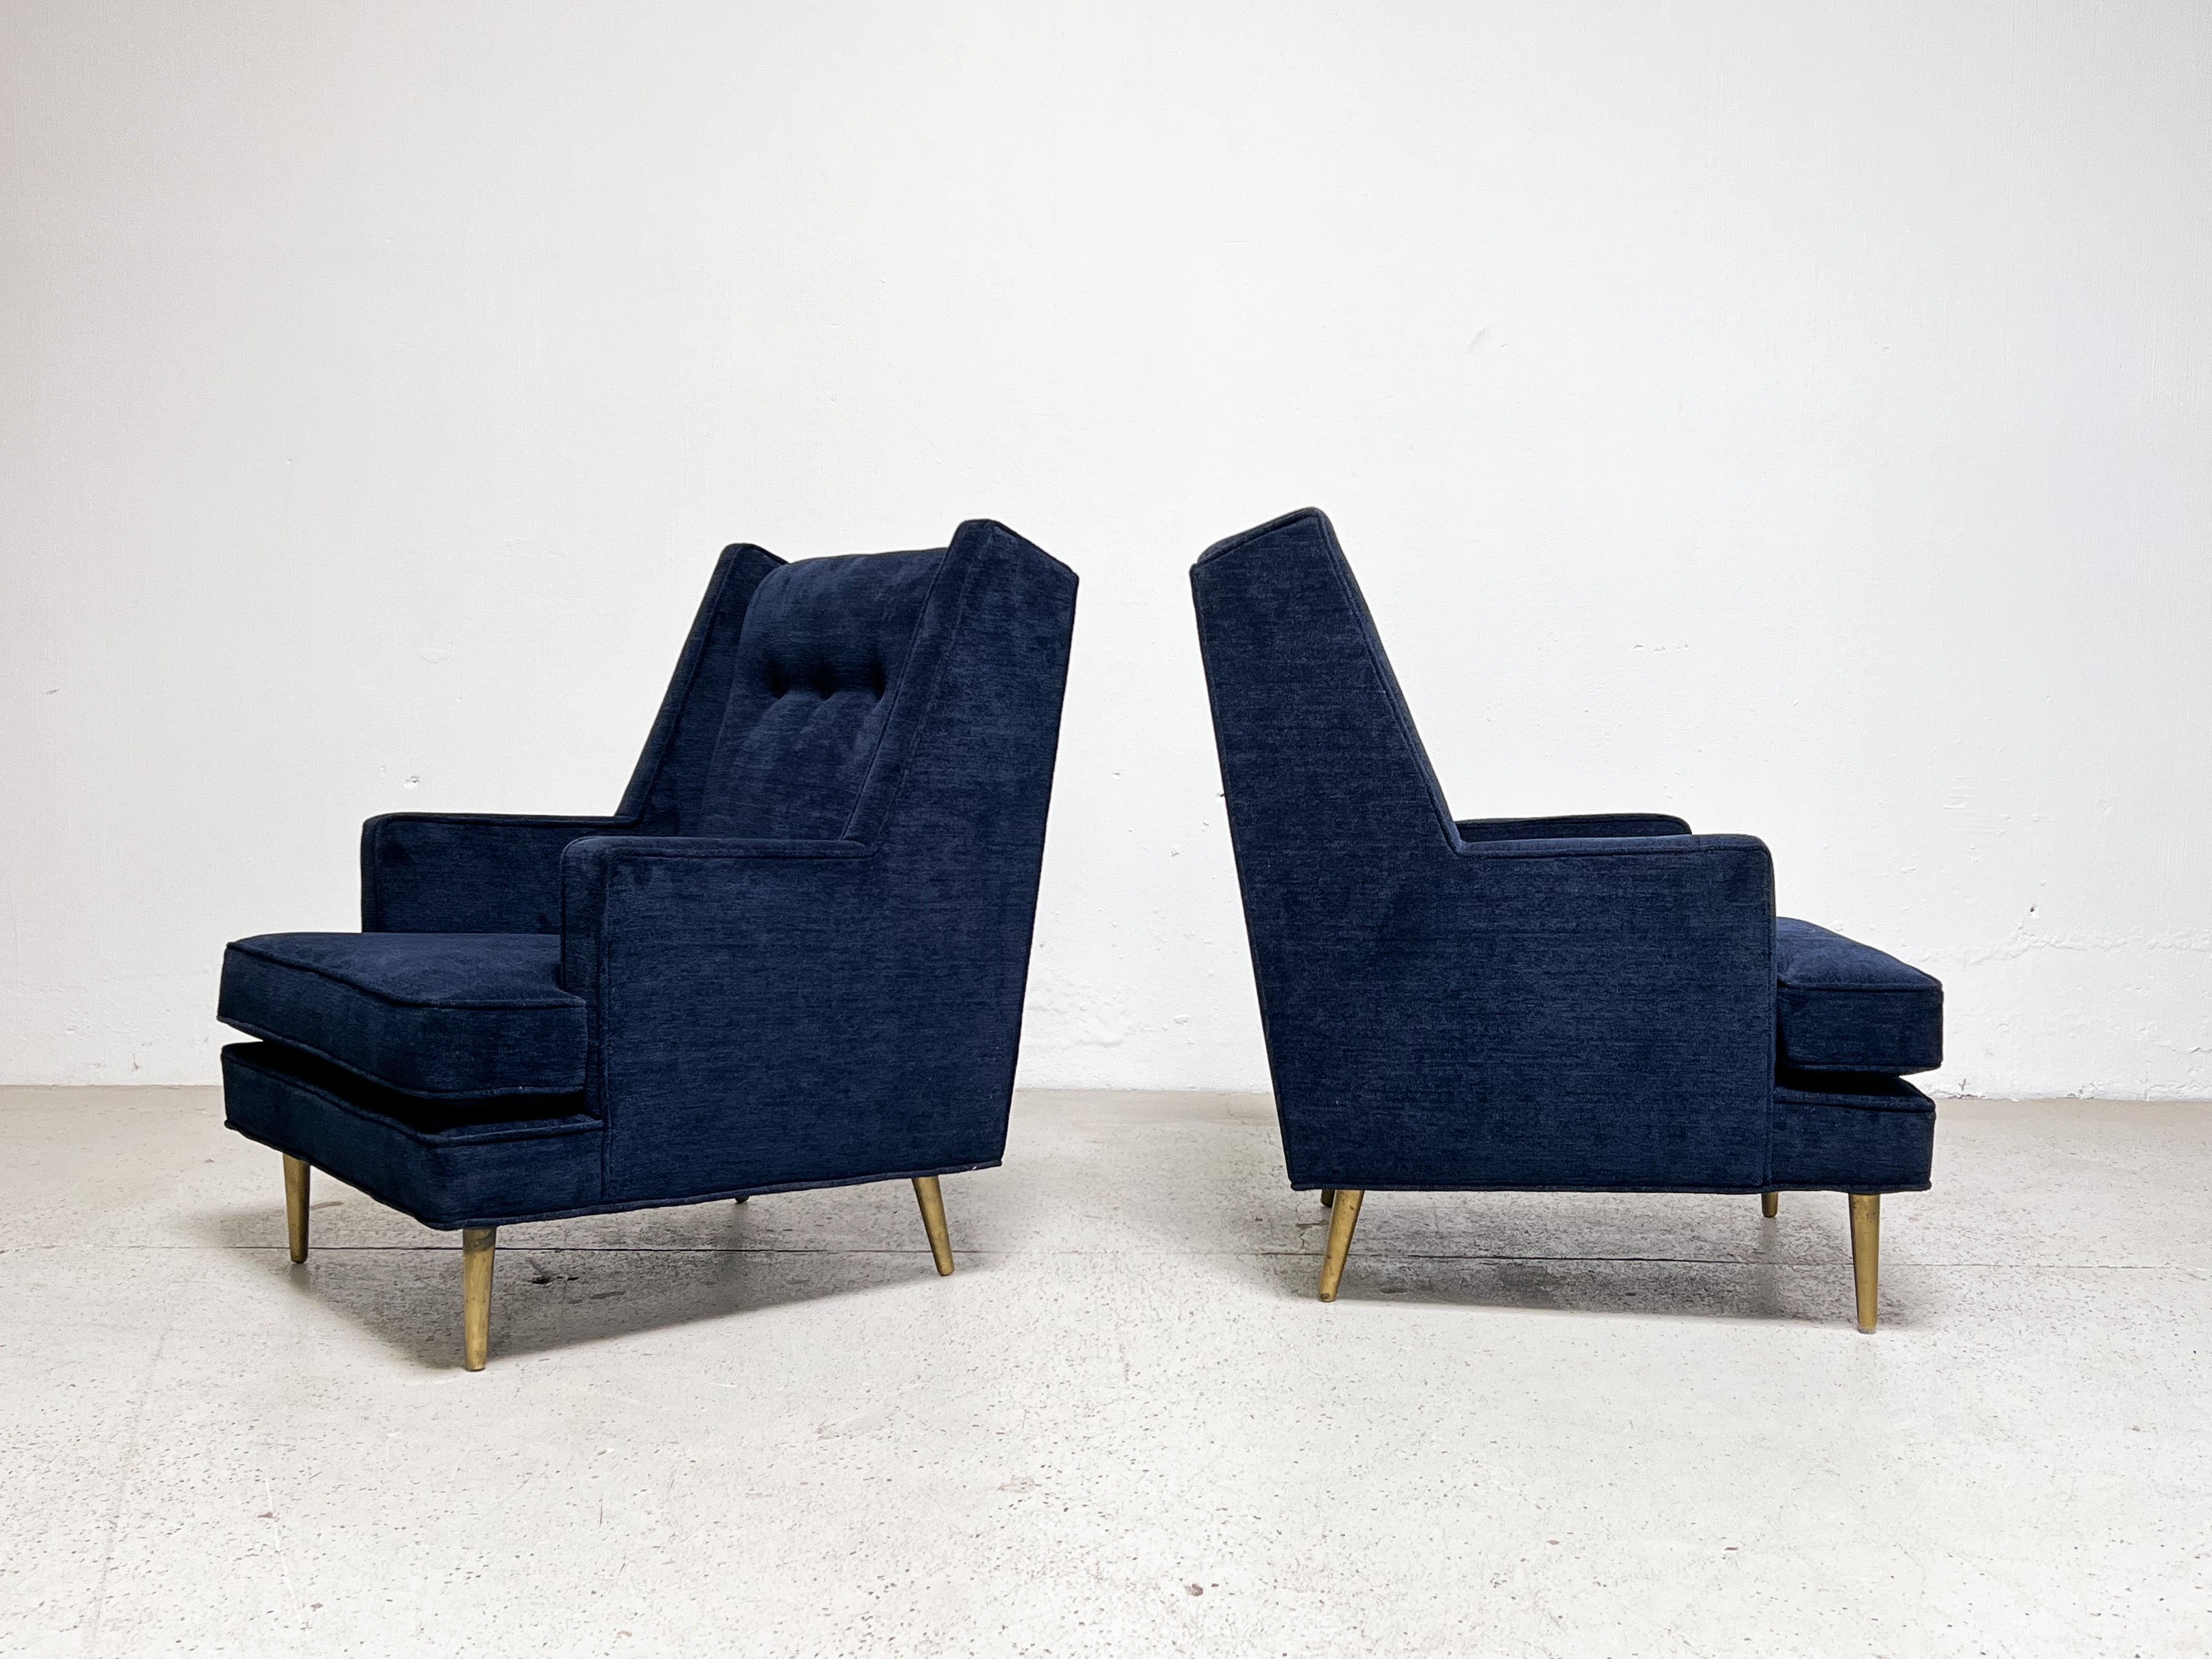 A classic pair of Dunbar high back lounge chair on brass legs designed by Edward Wormley. Fully restored and upholstered in a deep blue chenille fabric.